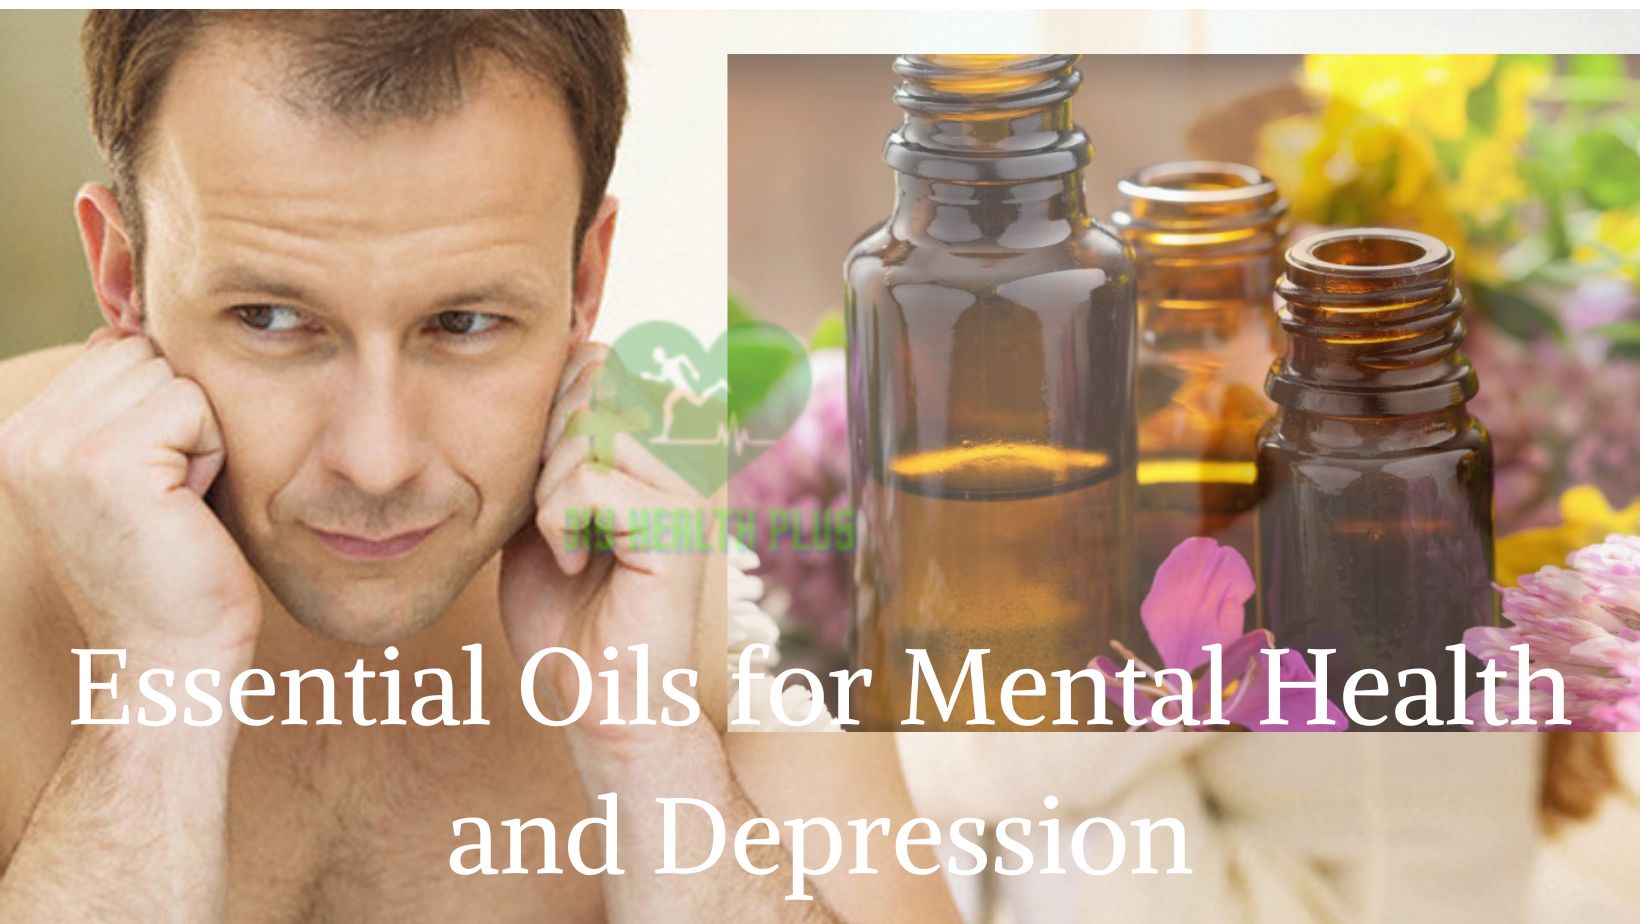 Essential Oils for mental health and depression